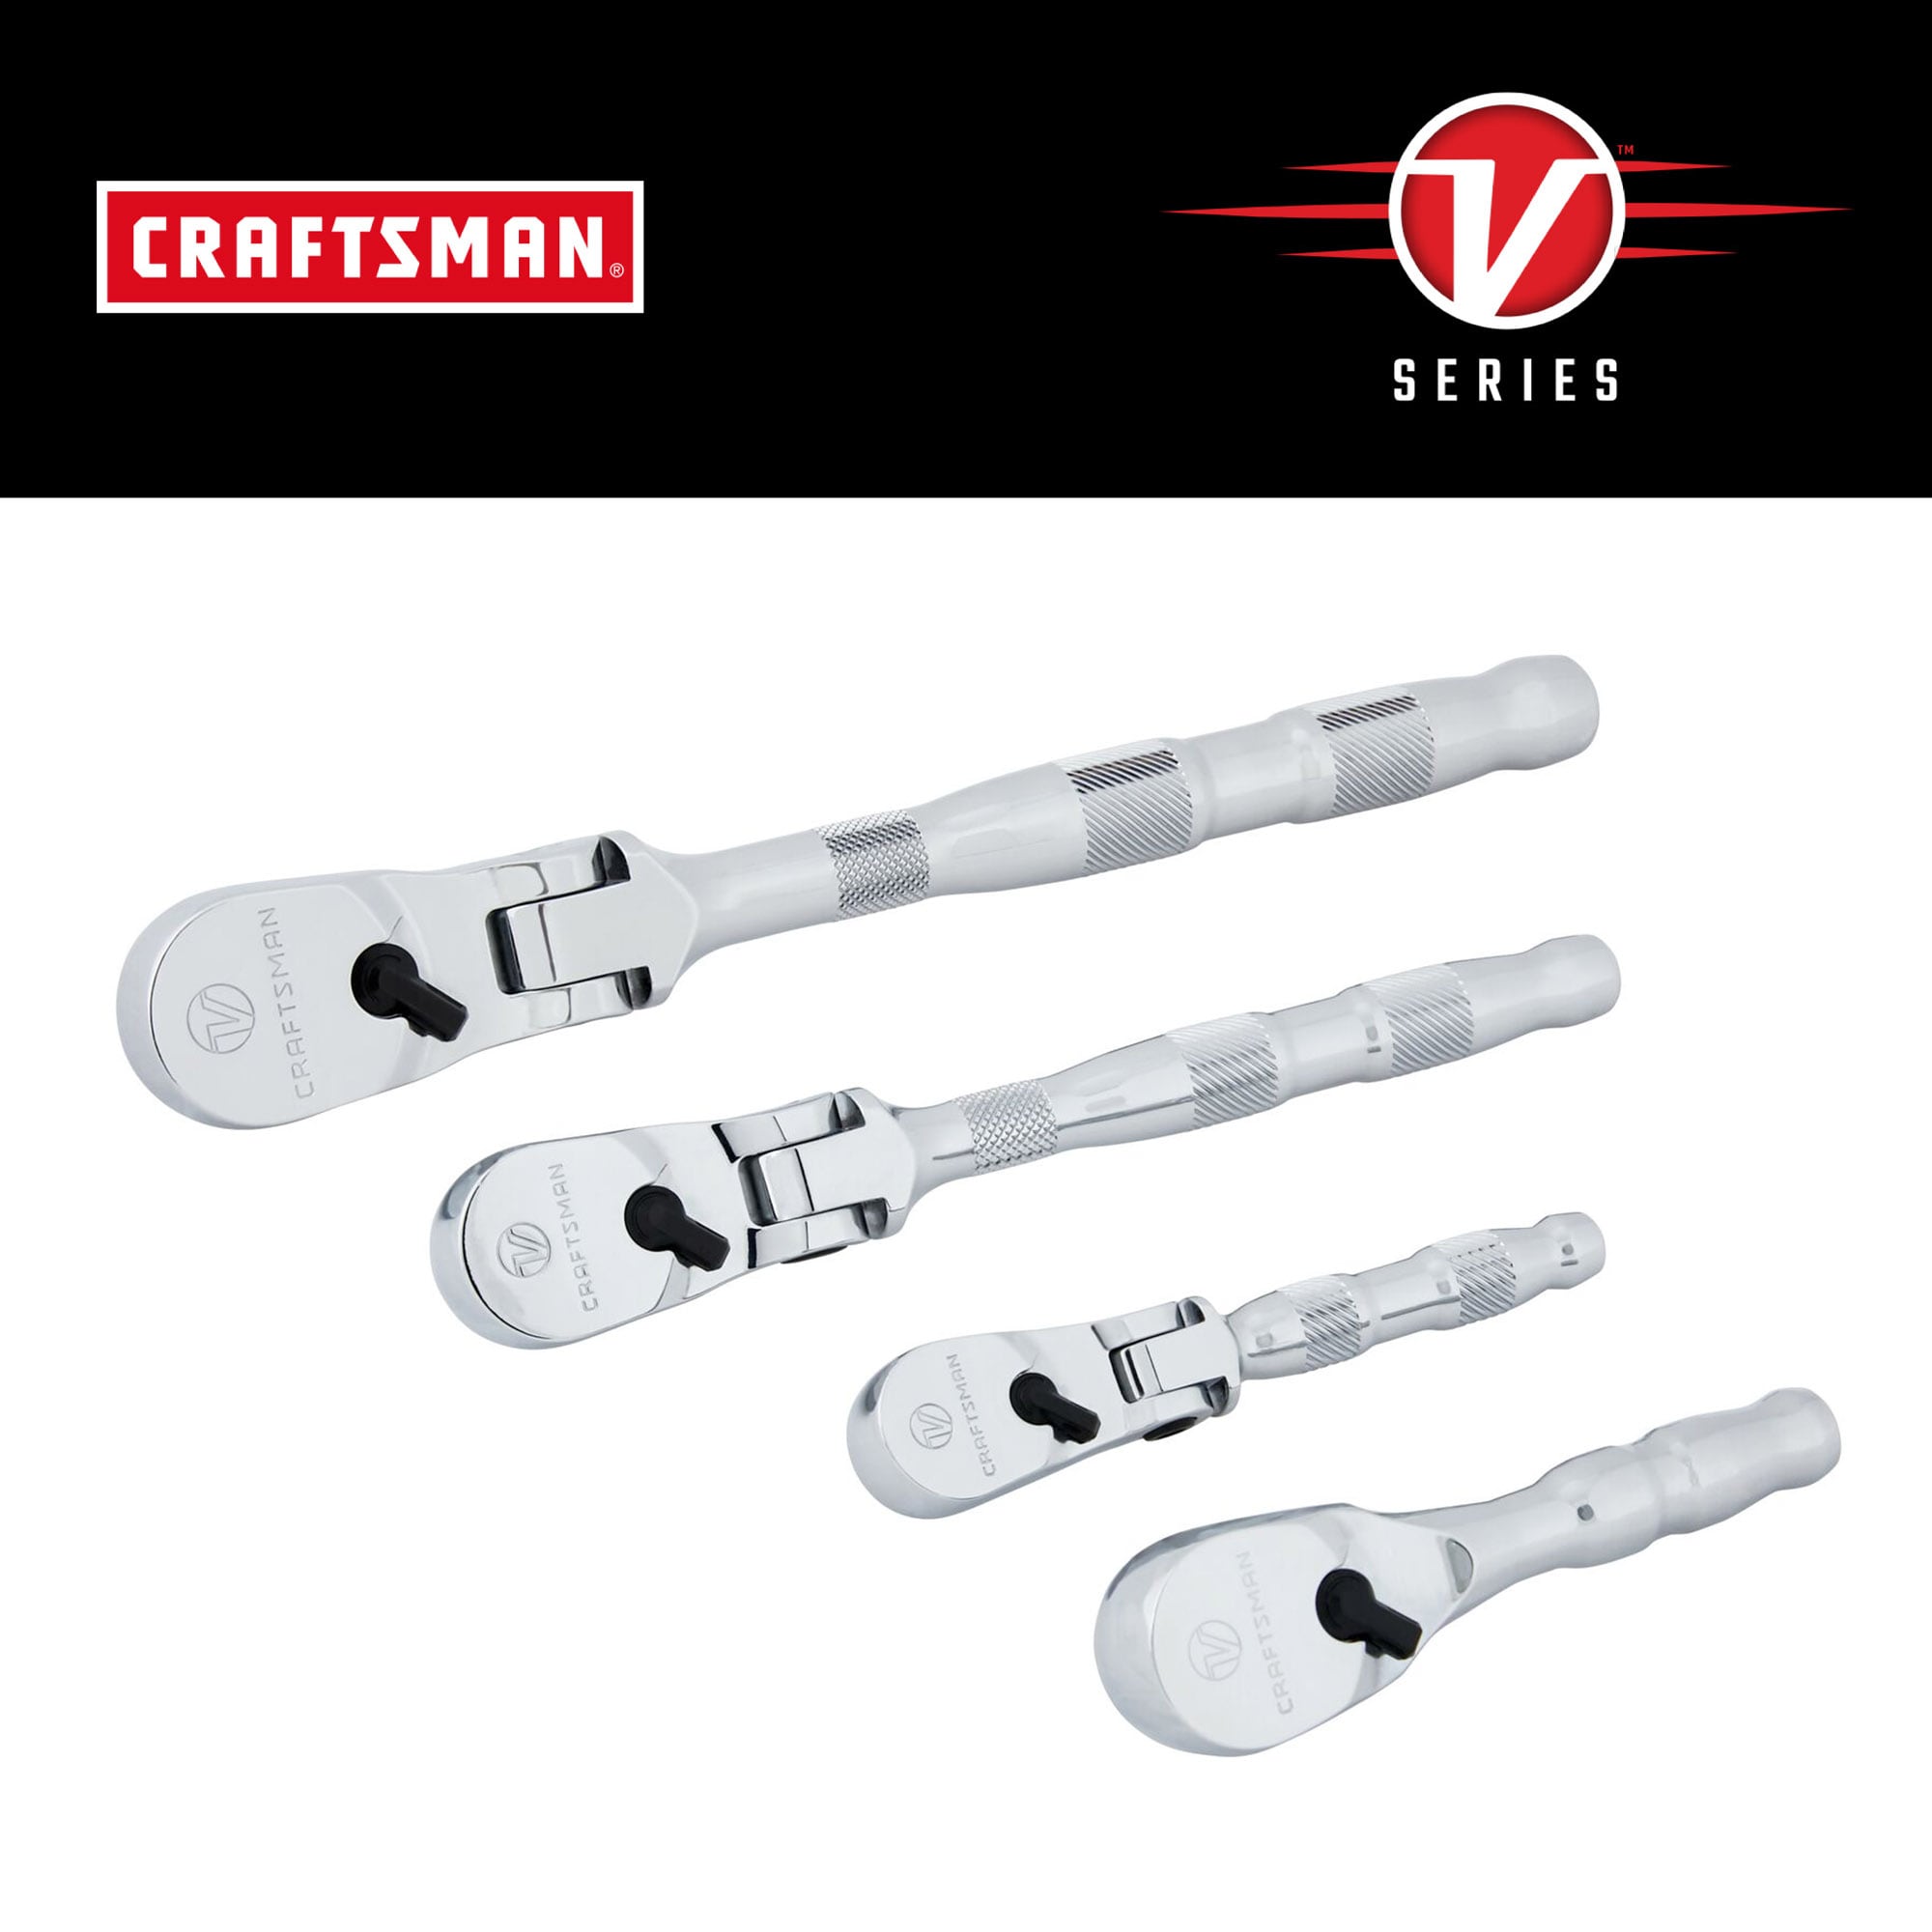 CRAFTSMAN V-Series 3-Piece Set-Tooth 1/2-in; 3/8-in; 1/4-in Drive